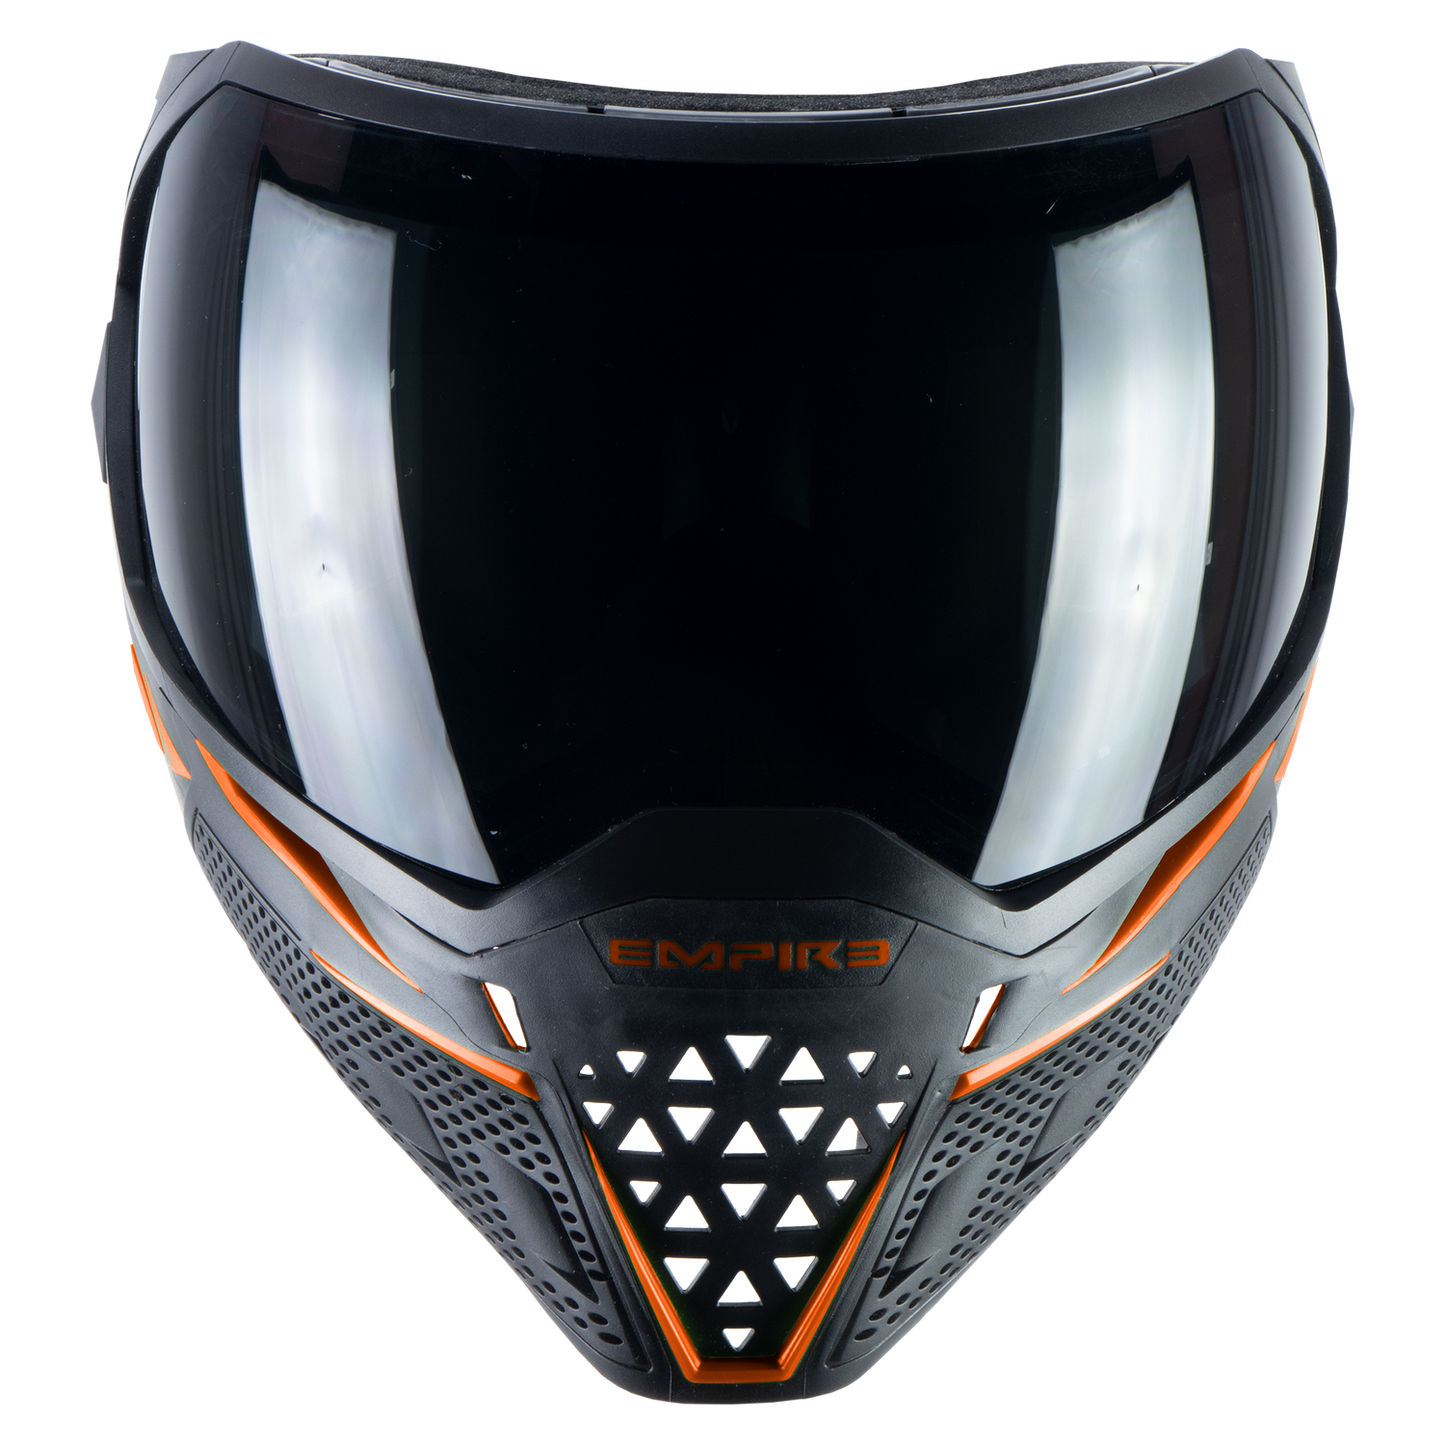 Empire EVS Goggle - Black/Orange - with 2 lenses [Thermal Ninja & Thermal Clear]